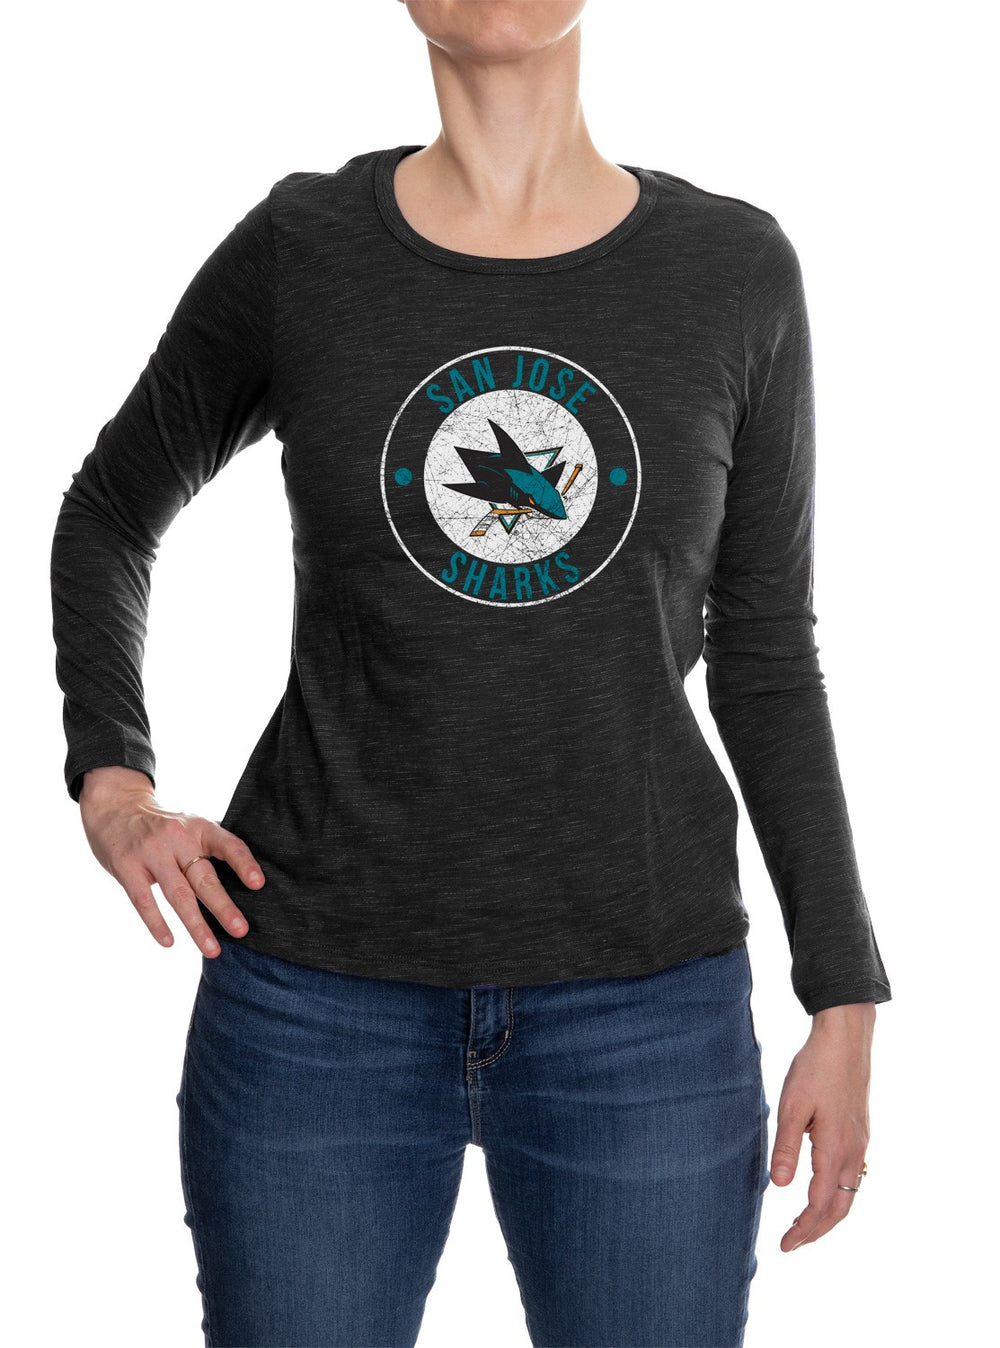 San Jose Sharks Distressed Logo Long Sleeve Shirt for Women in Black Front View